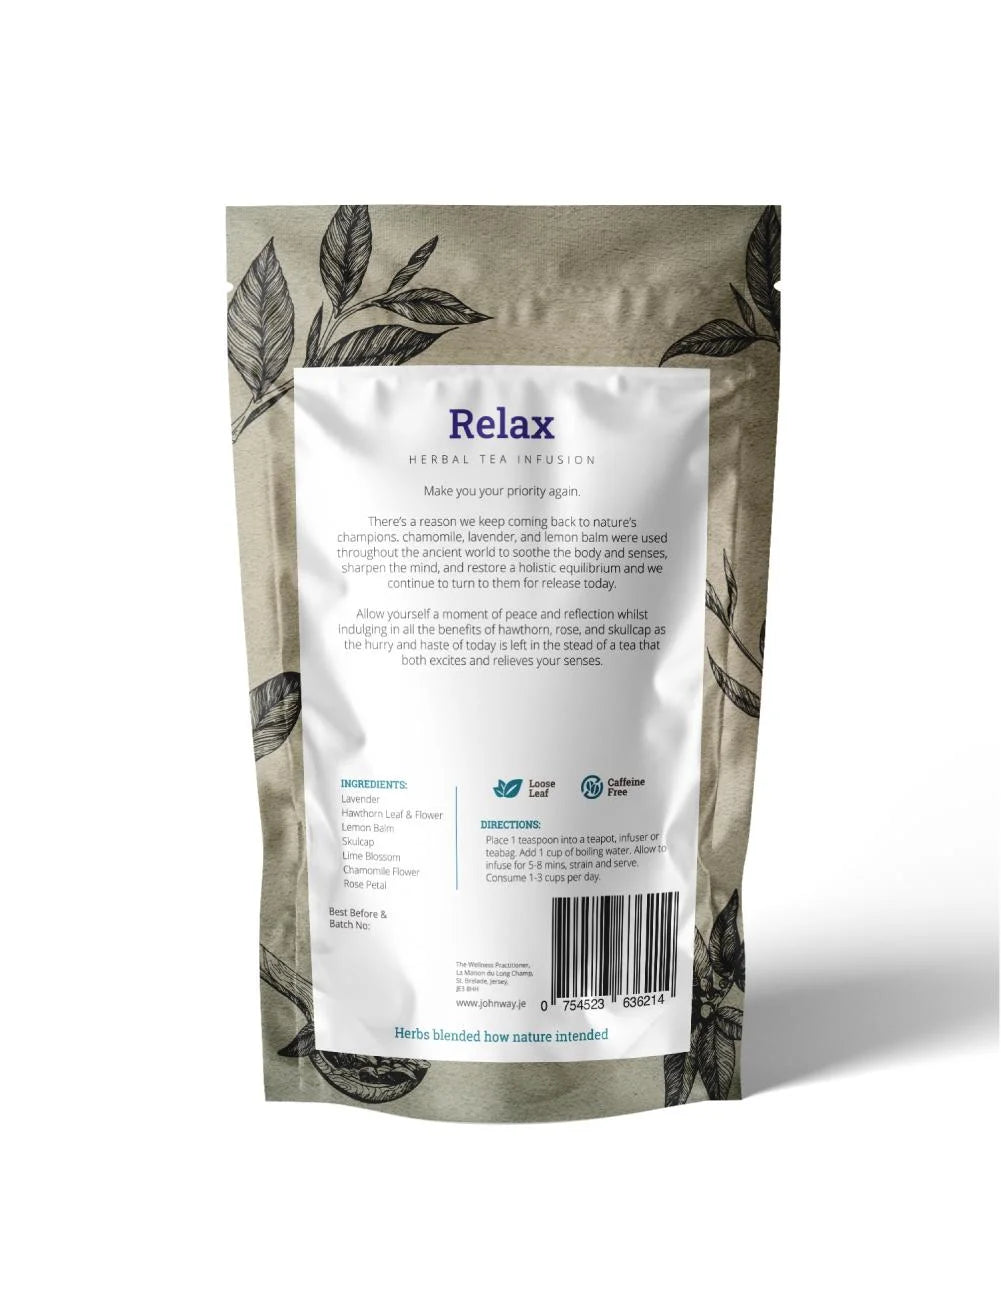 RELAX HERBAL TEA INFUSION (LOOSE LEAF)